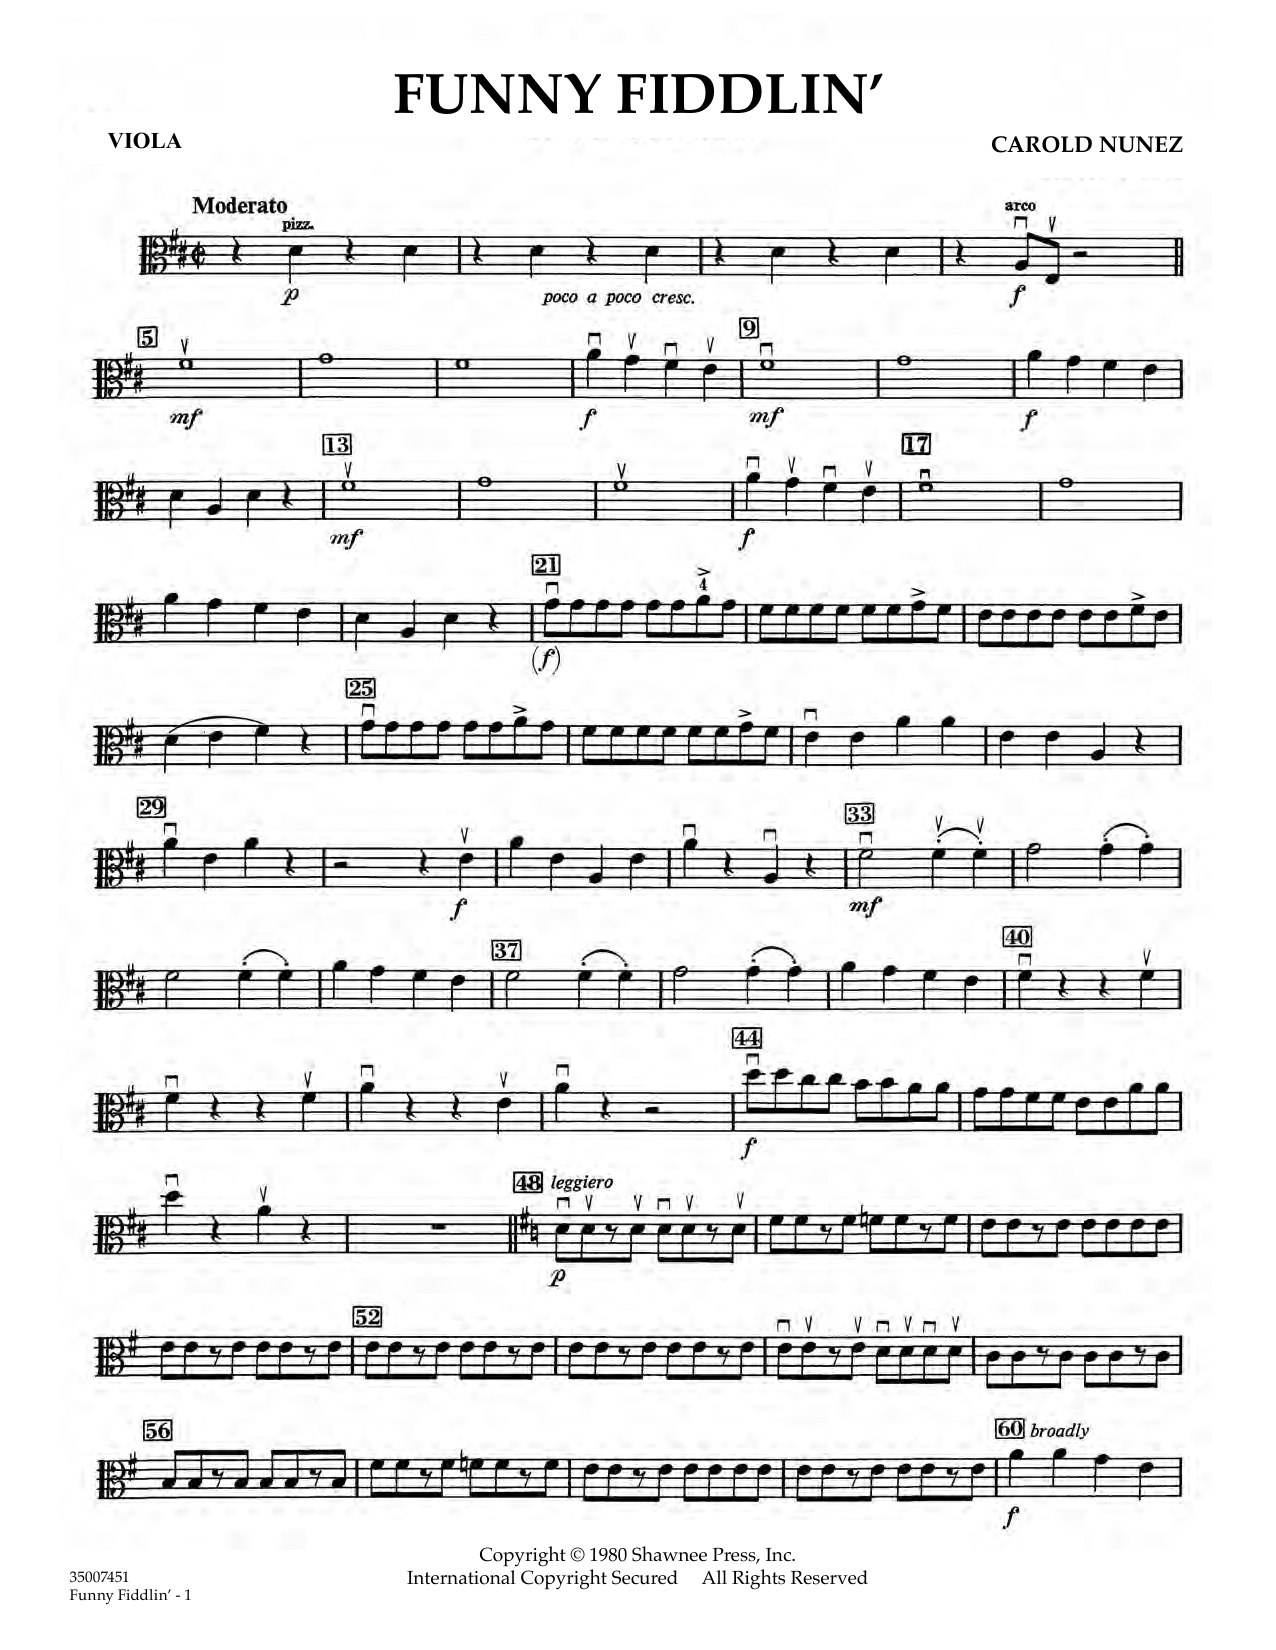 Carold Nuñez Funny Fiddlin' - Viola sheet music notes and chords. Download Printable PDF.